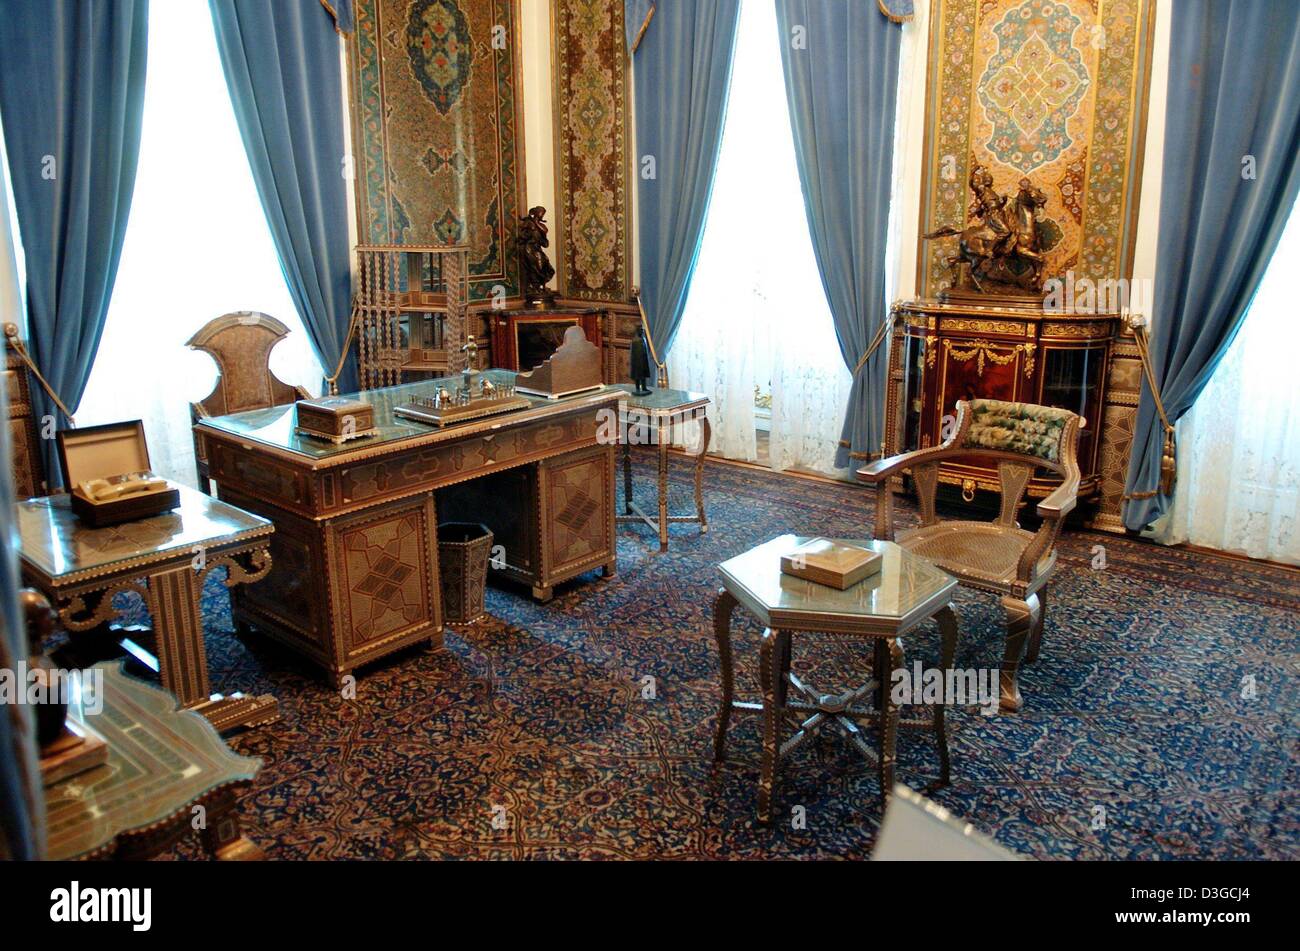 (dpa) - View of the study in the White Palace of former Shah Mohammed Reza Pahlavi, who was ousted in 1979, in the capital of Tehran, Iran, 8 October 2004. Stock Photo